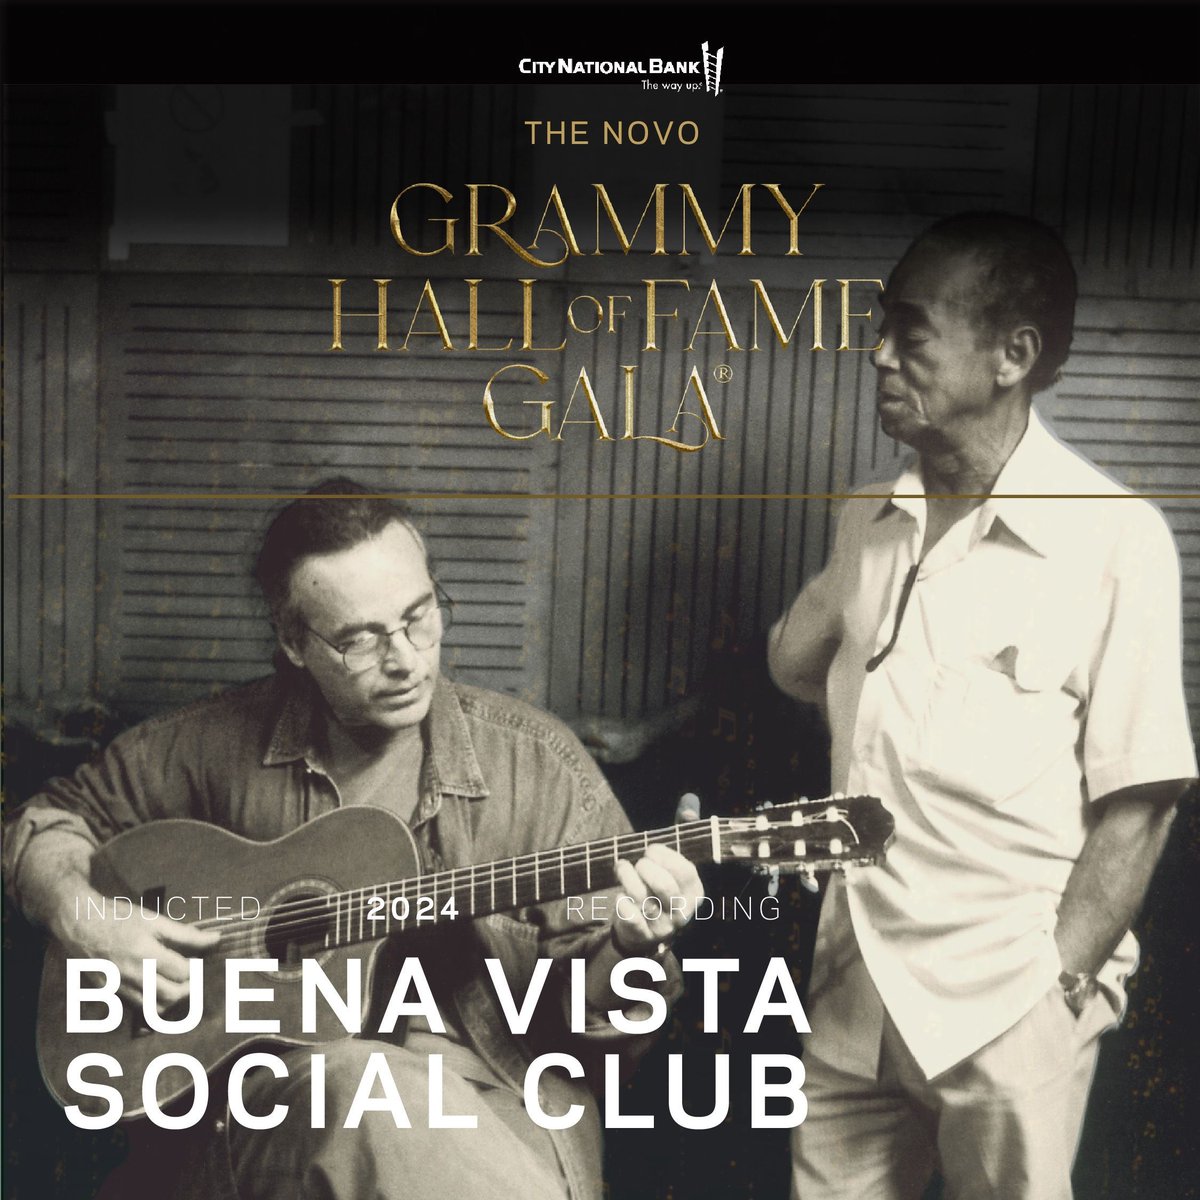 The 'Buena Vista Social Club' album is an official 2024 #GRAMMYHallOfFame inducted recording! 🌟 On May 21, the album was honored at the @RecordingAcad & @GRAMMYMuseum's inaugural GRAMMY Hall of Fame Gala at @TheNovoDTLA. grammy.com/news/recording…